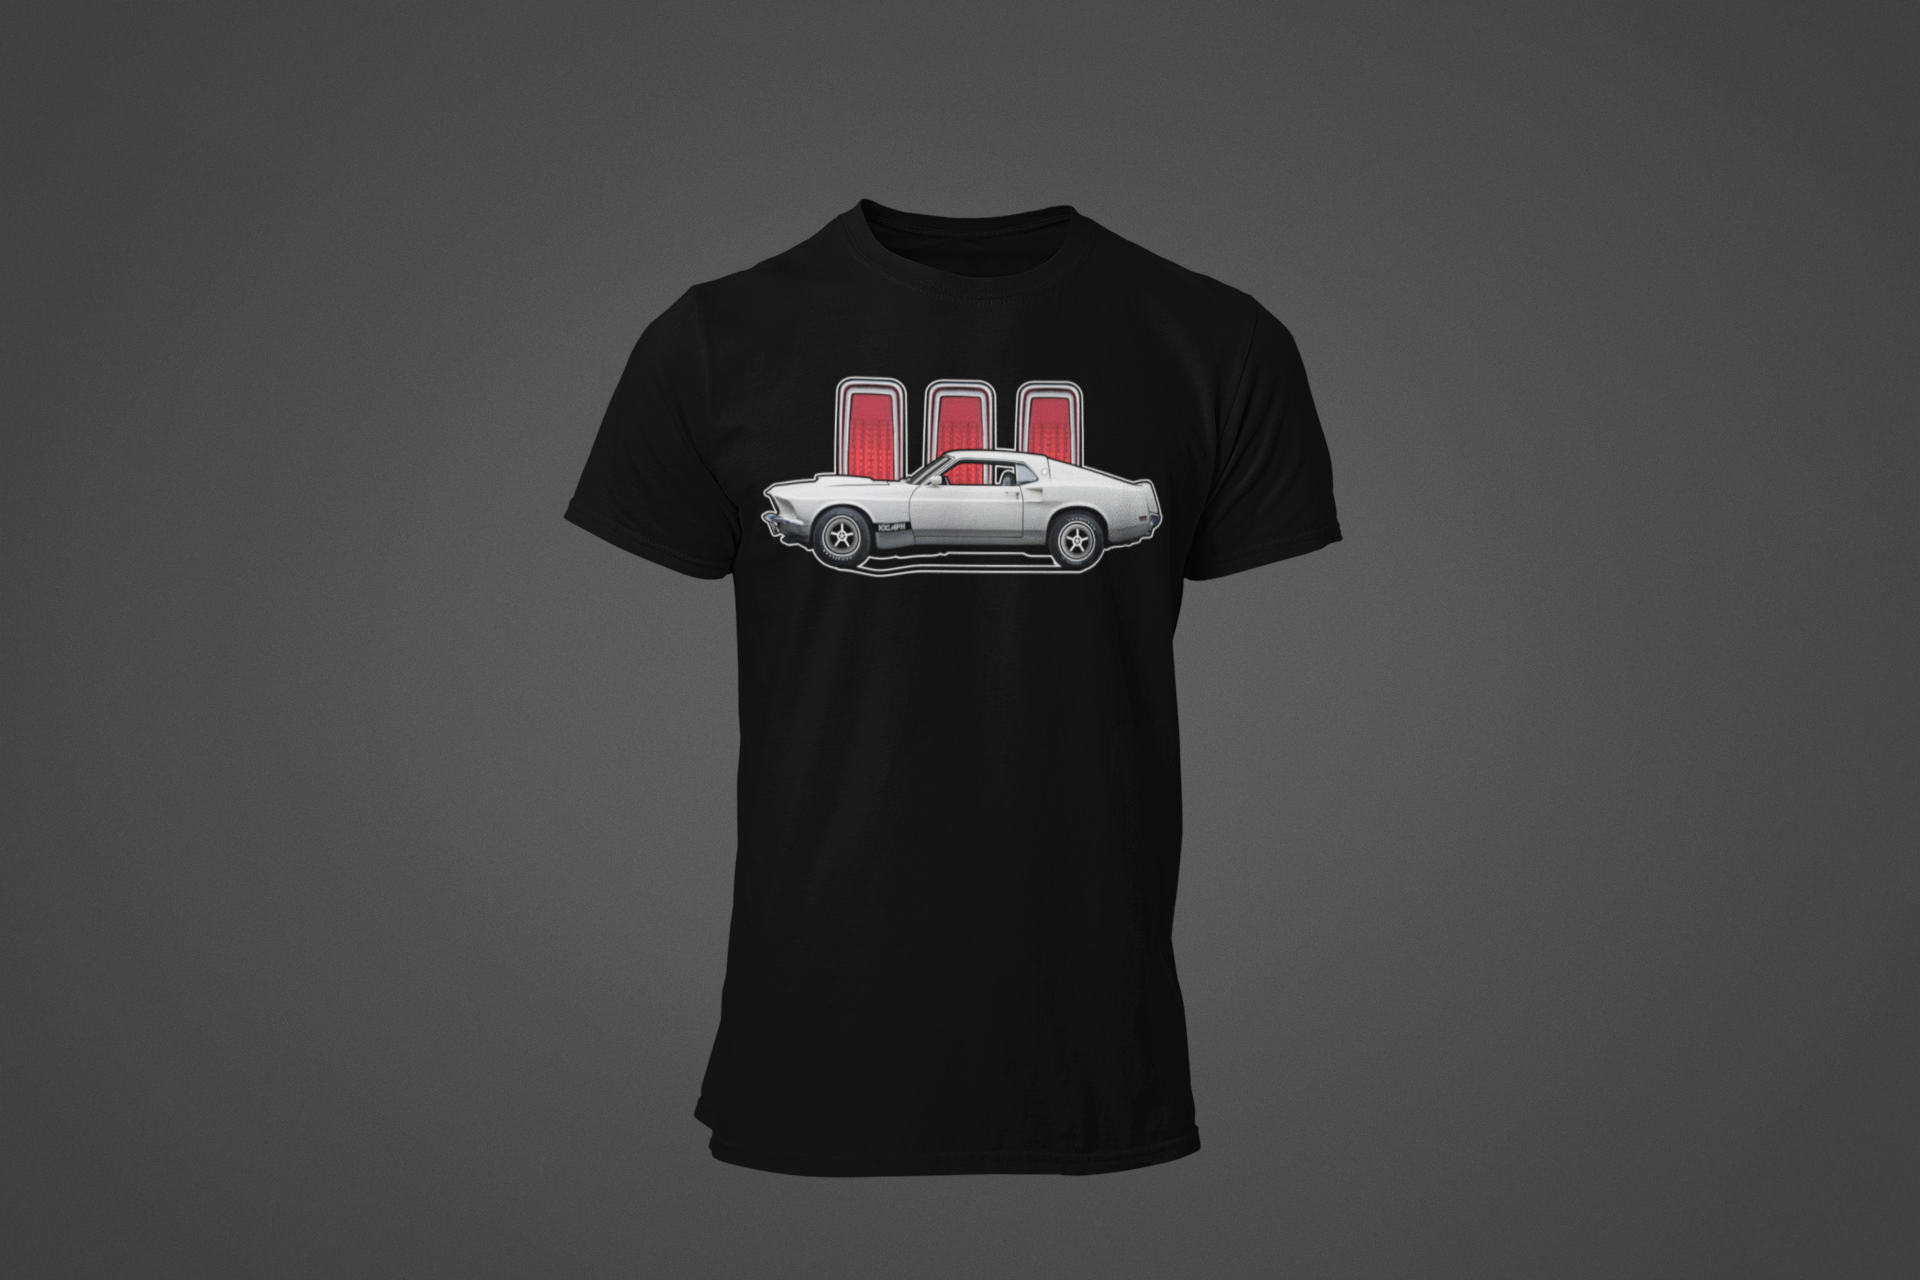 A black tee shirt featuring an image of a Ford Mustang